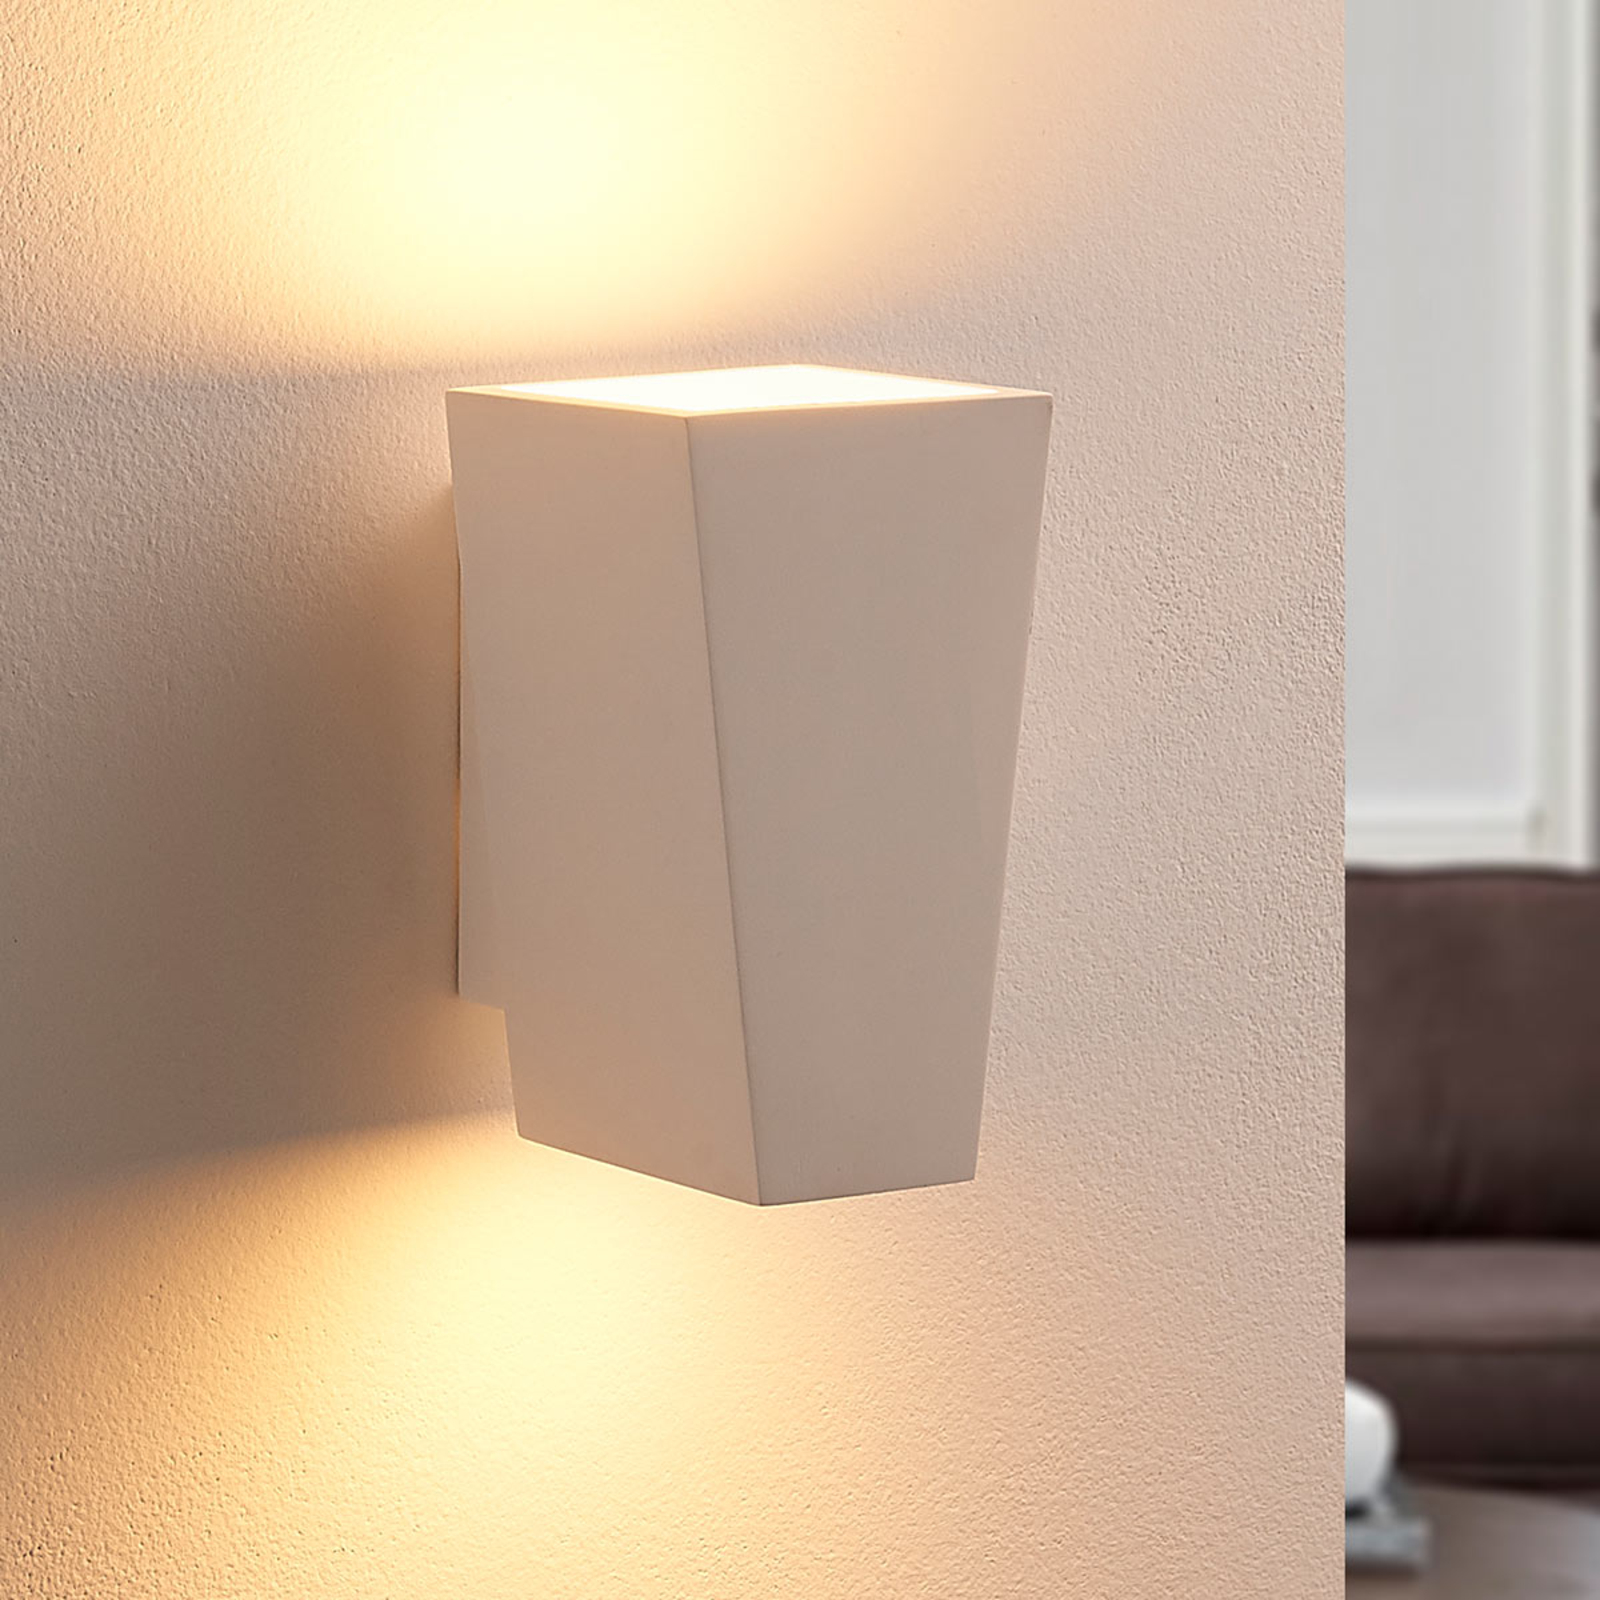 White LED wall lamp made of plaster